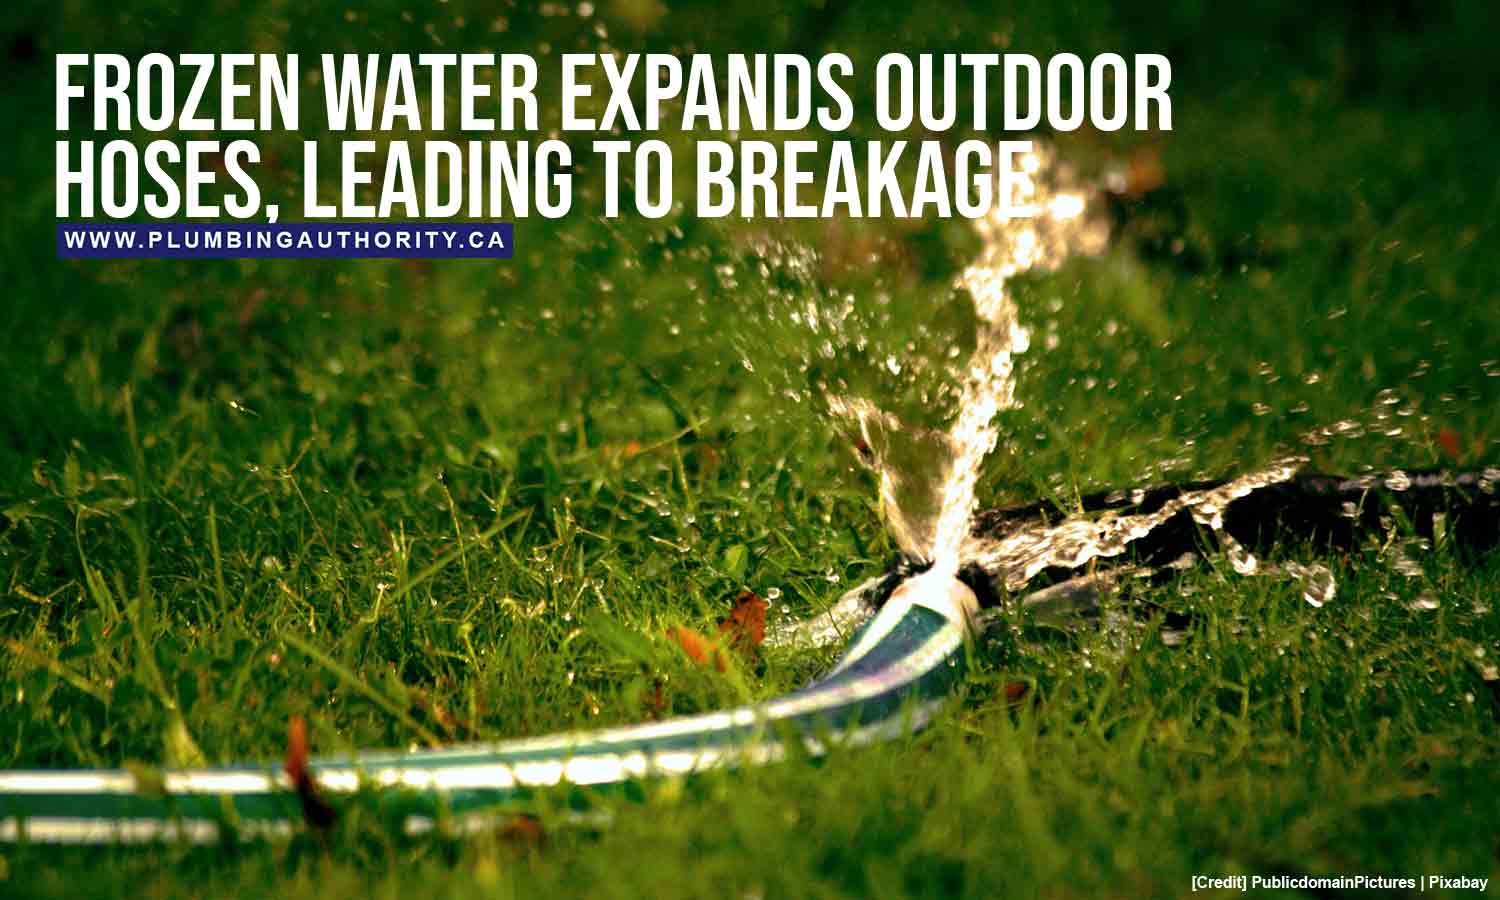 Frozen water expands outdoor hoses